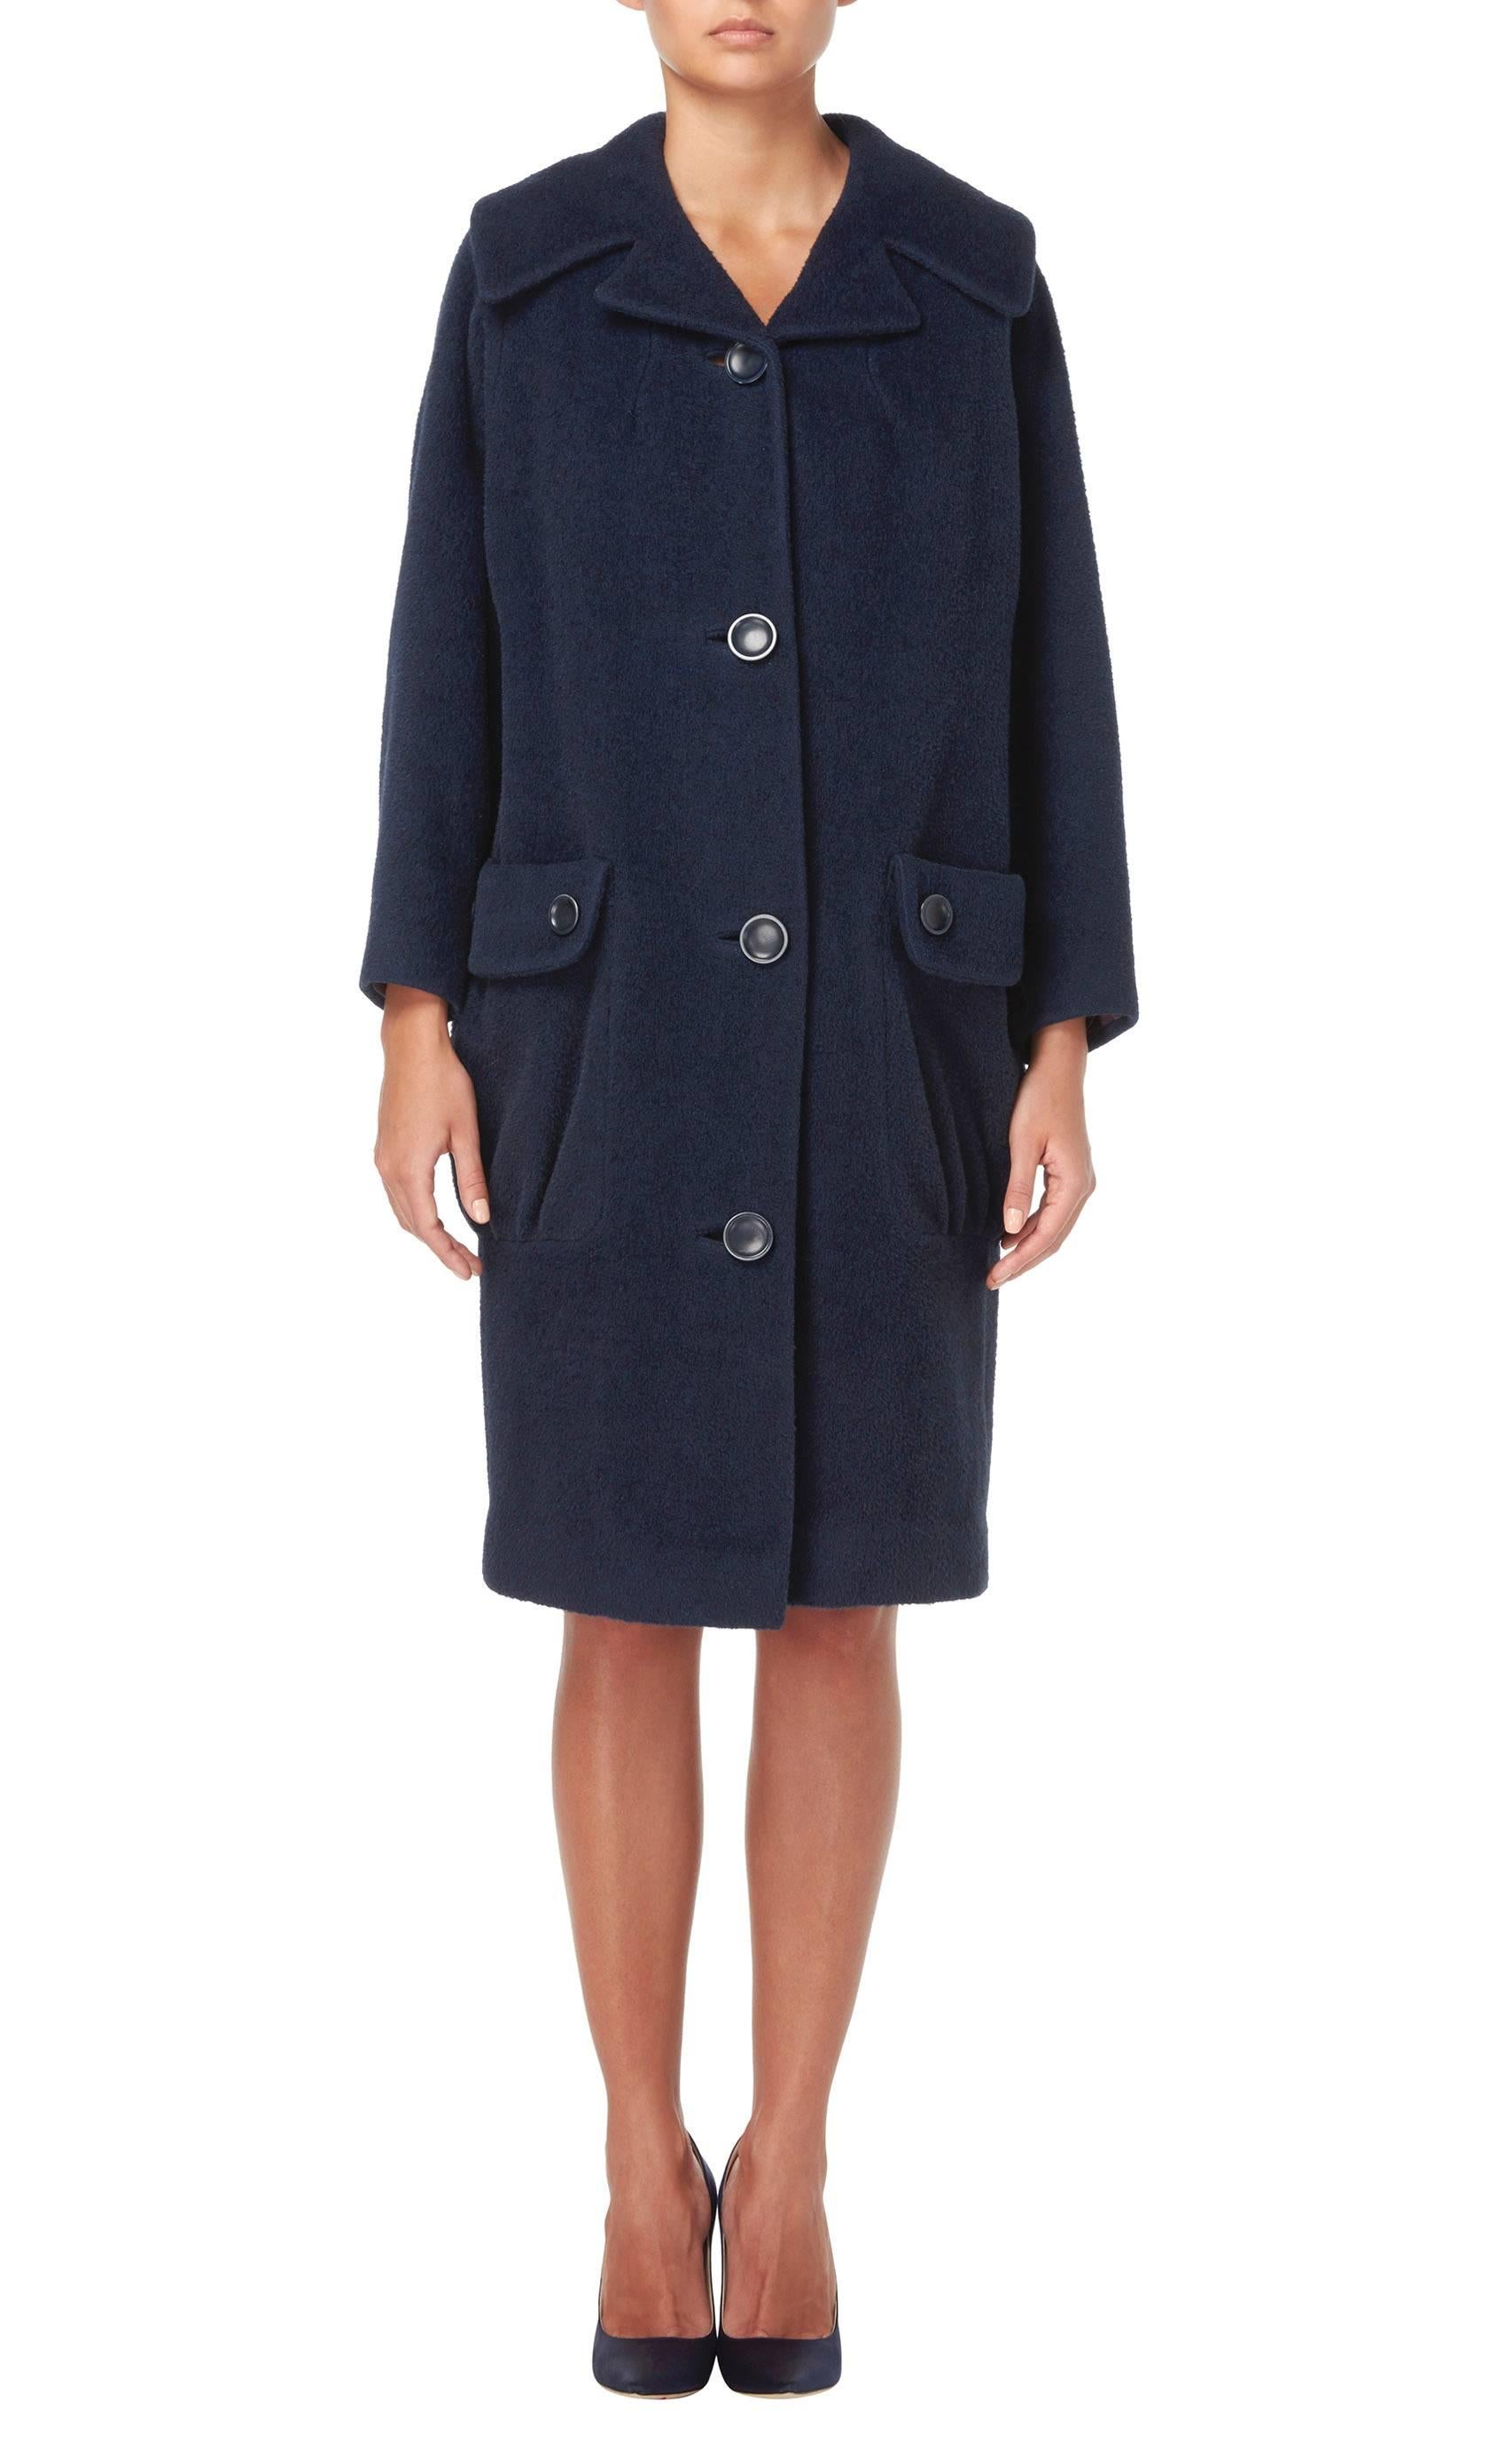 This Pierre Cardin coat is constructed in an amazing shade of petrol blue wool. Smart enough for the office, this coat will look just as good worn with jeans for weekends. Featuring an exaggerated double lapel collar and overscale outside pockets on